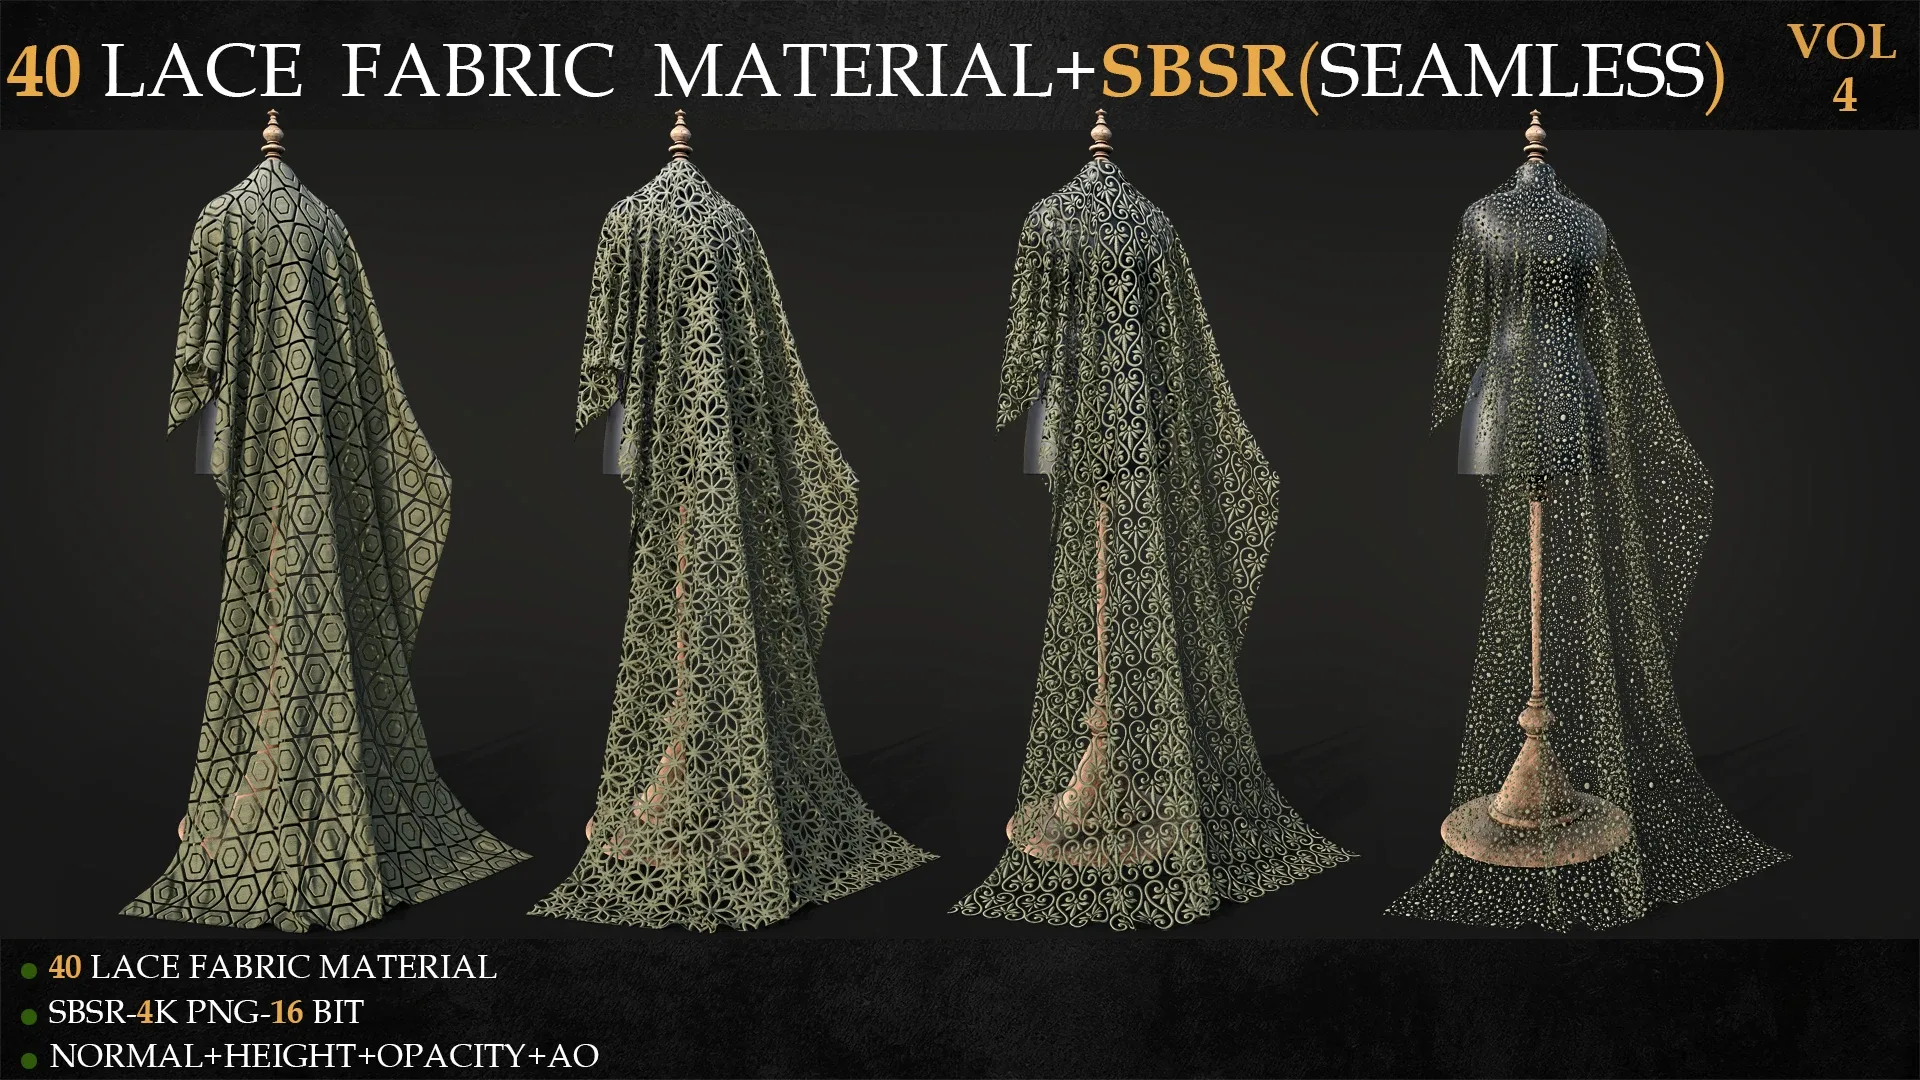 40 LACE FABRIC MATERIAL+SBSR(SEAMLESS)-VOL 4